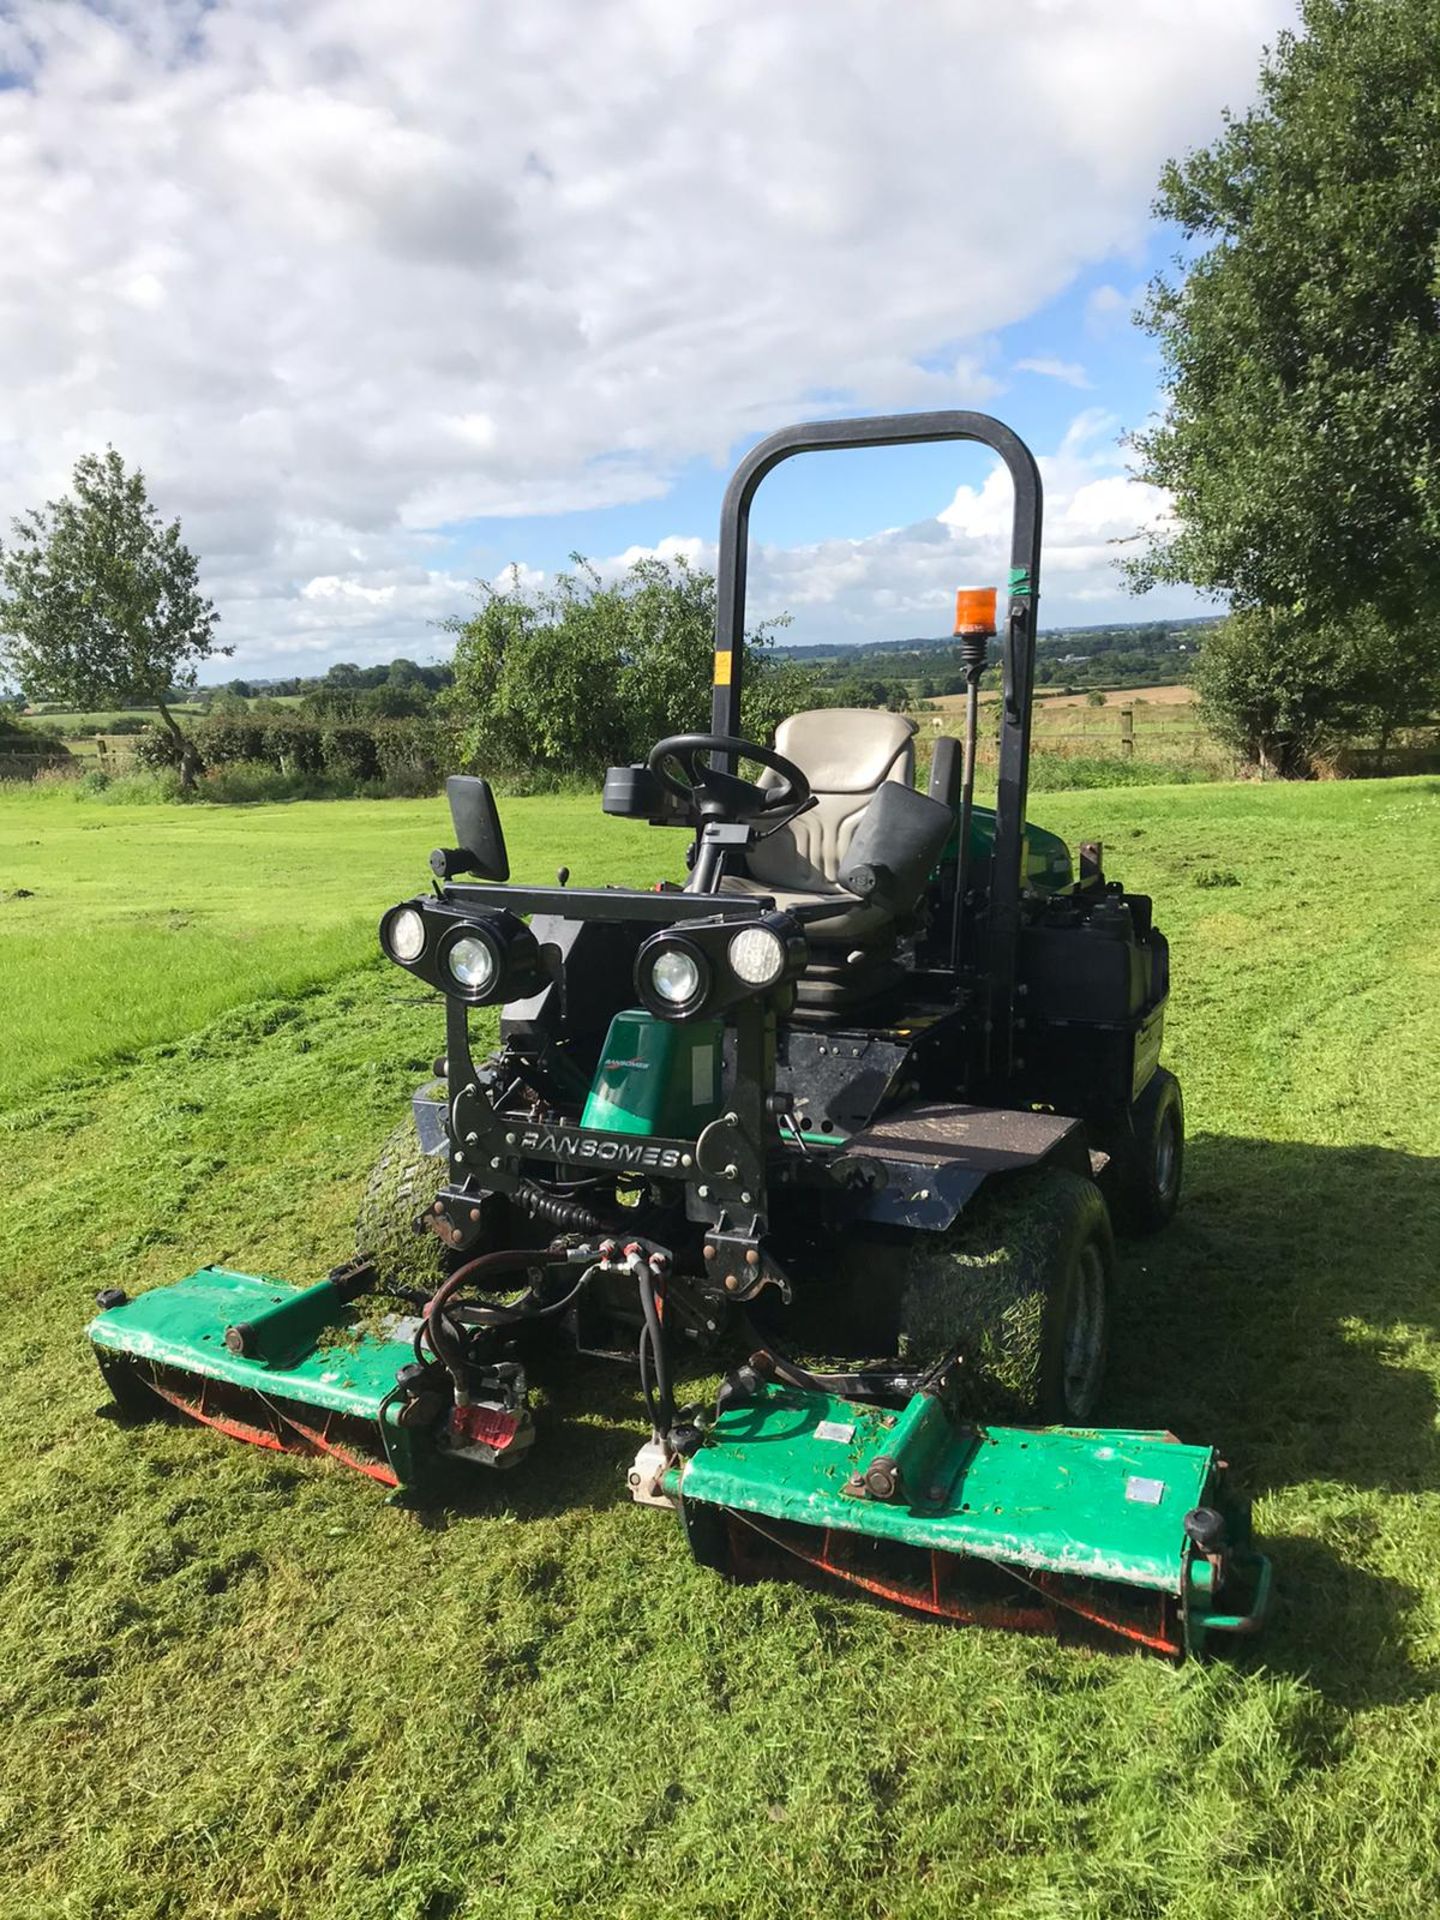 2013 RANSOMES PARKWAY 3 GANG RIDE ON LAWN MOWER WITH ROLL BAR, RUNS, DRIVES AND CUTS *PLUS VAT* - Image 2 of 5